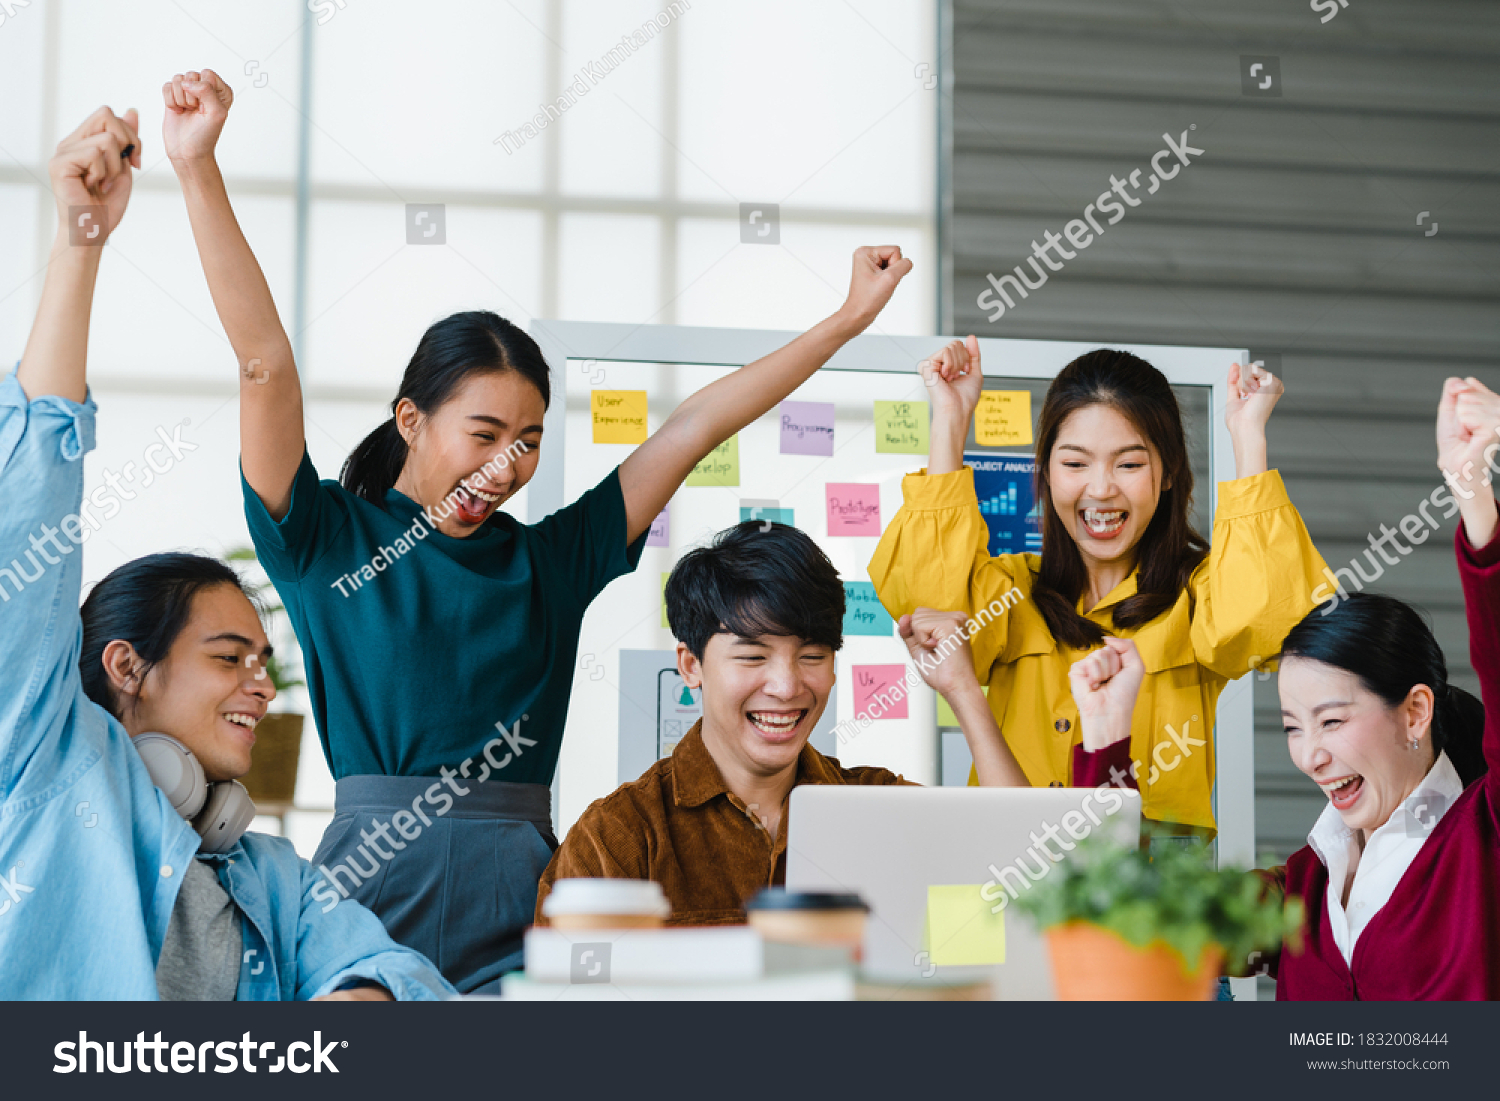 Group of Asia young creative people in smart casual wear discussing business celebrate giving five after dealing feeling happy and signing contract or agreement in office. Coworker teamwork concept. #1832008444